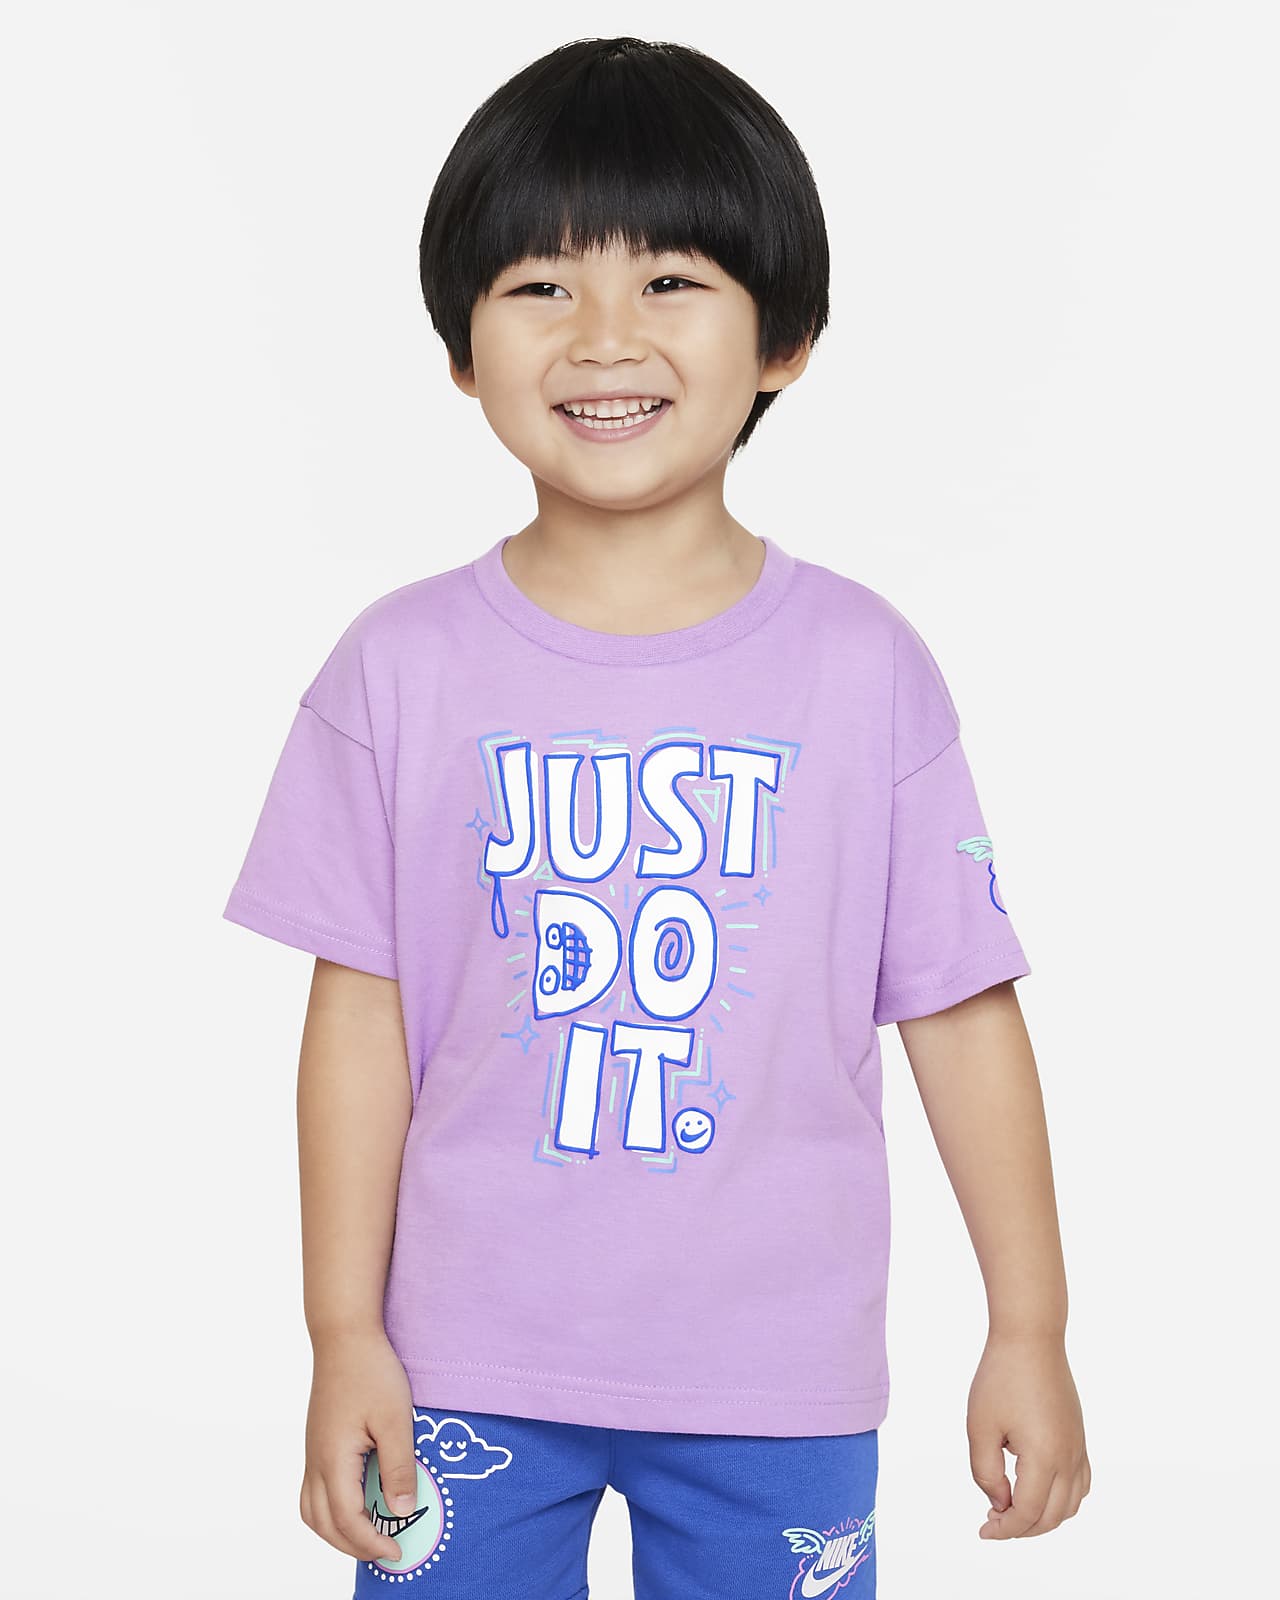 Nike Sportswear "Art of Play" Relaxed Graphic Tee Toddler T-Shirt